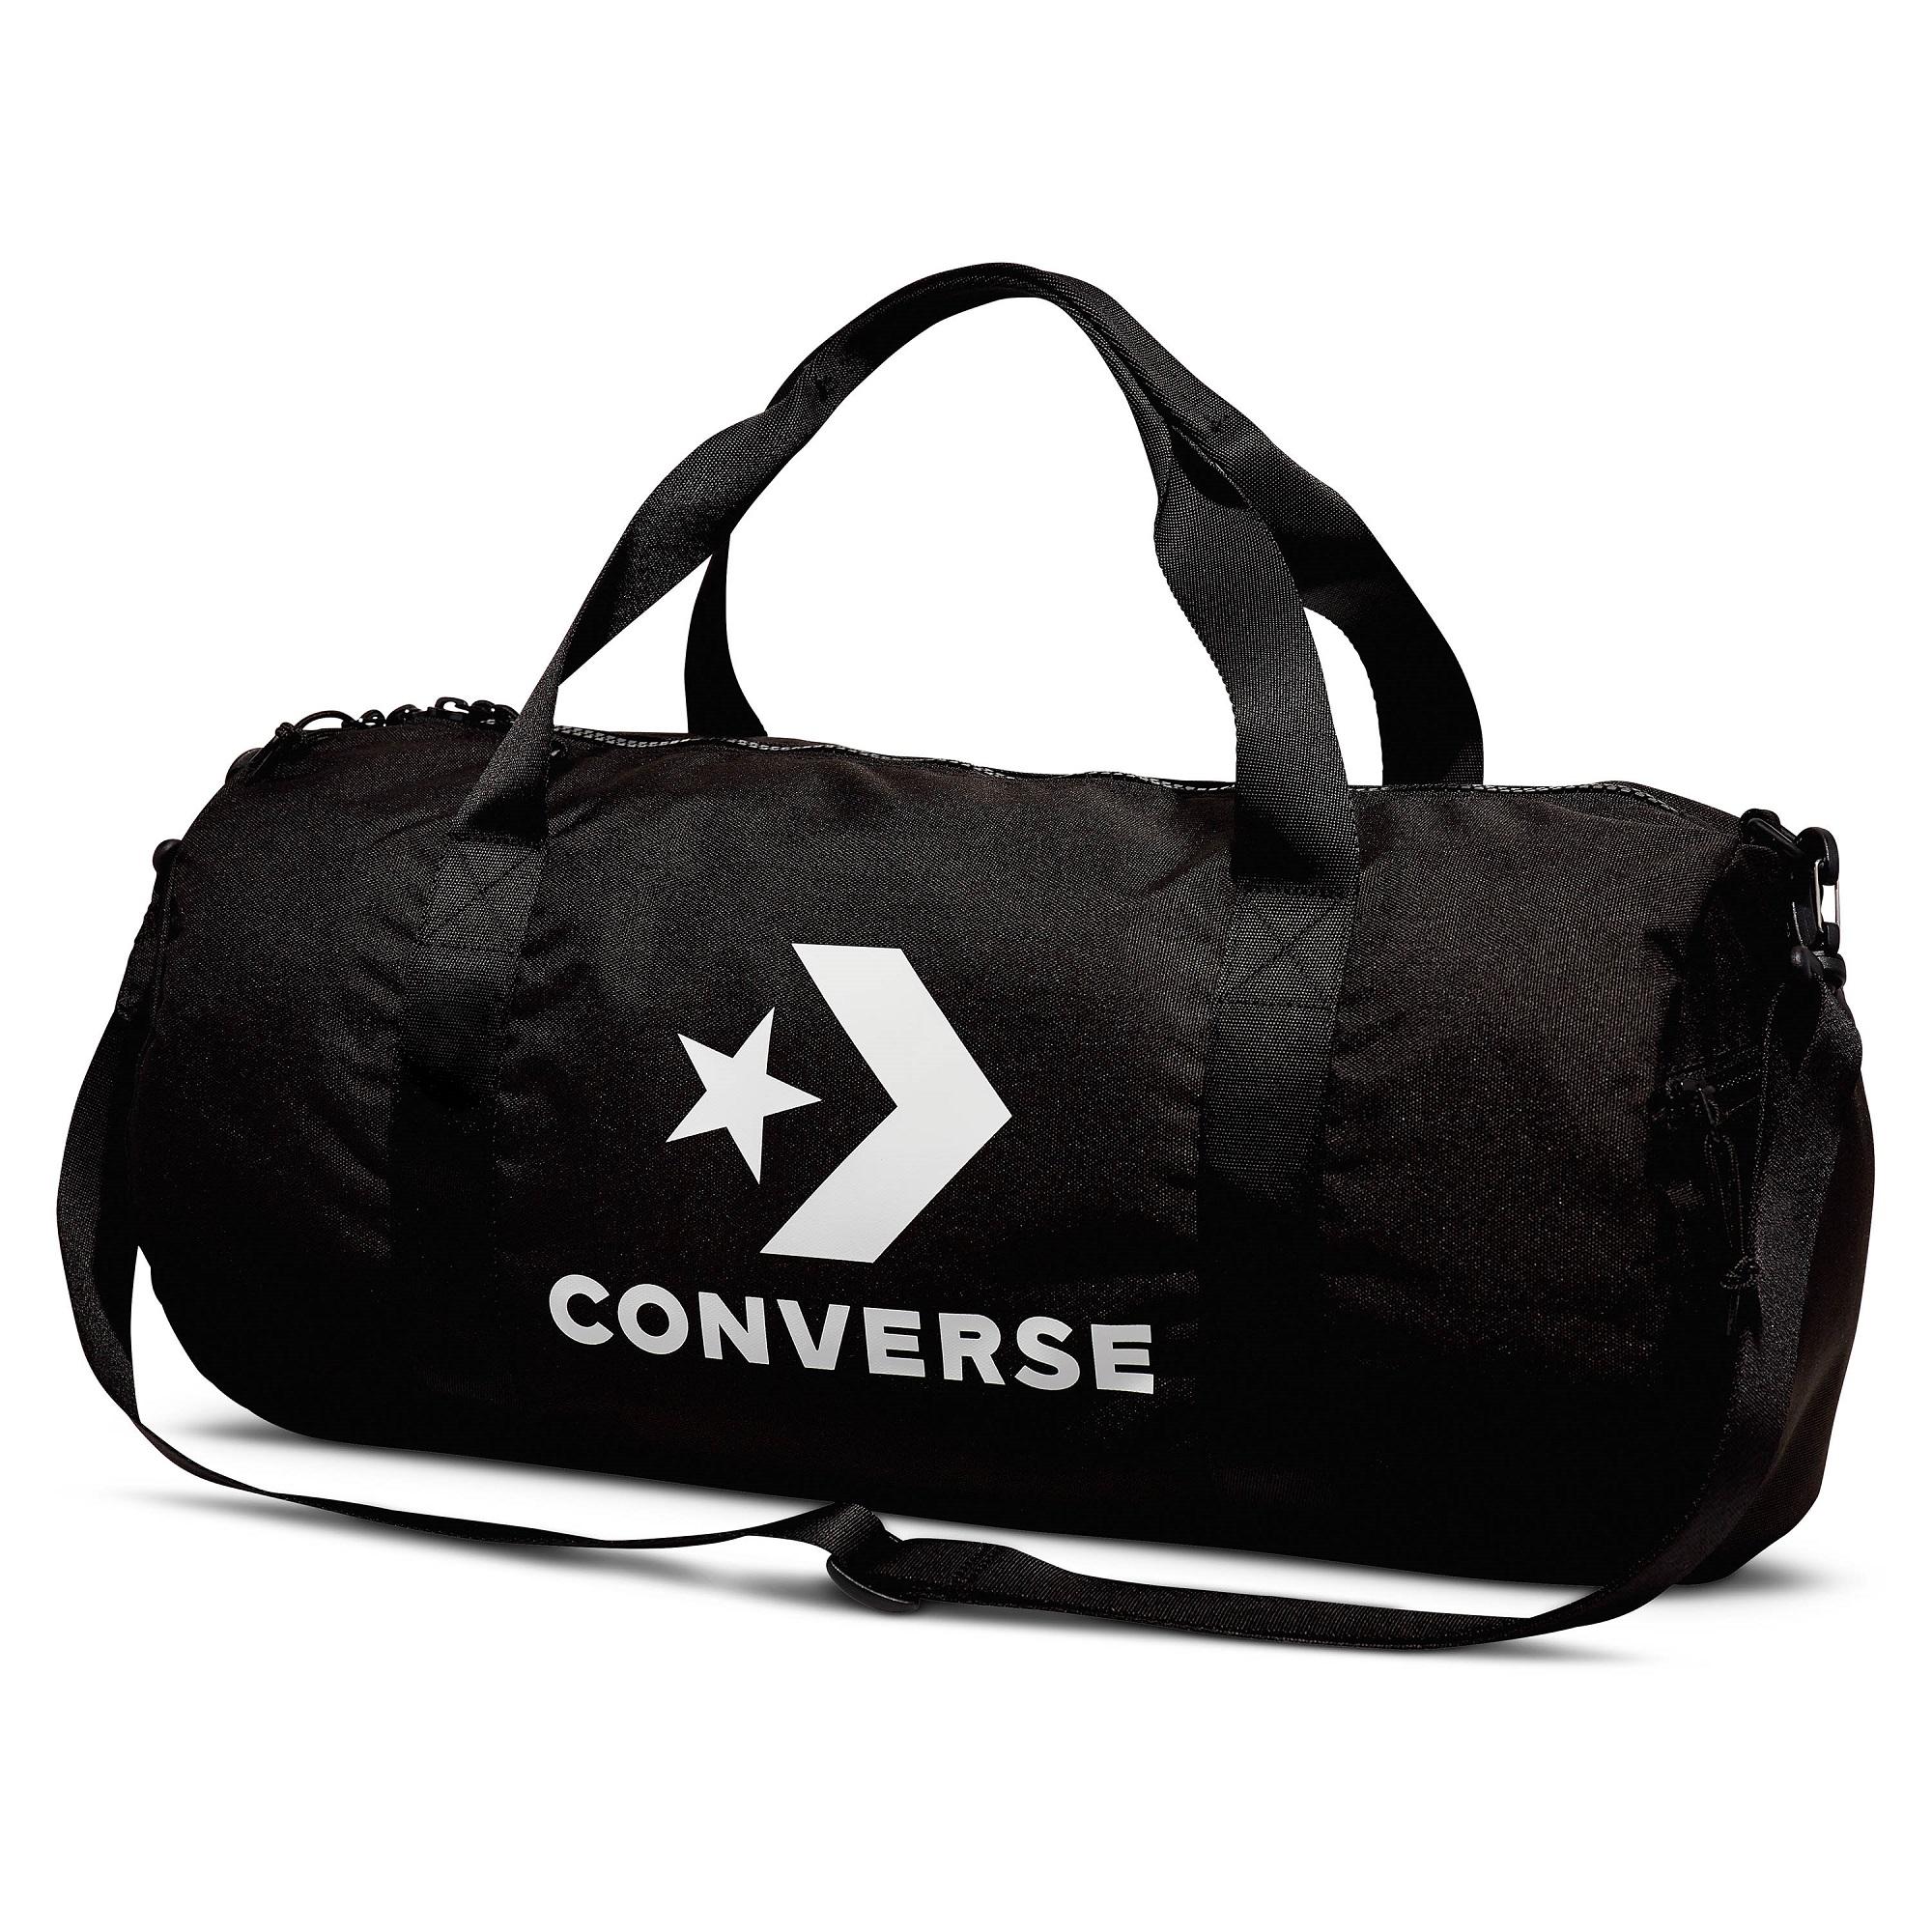 converse backpack philippines price